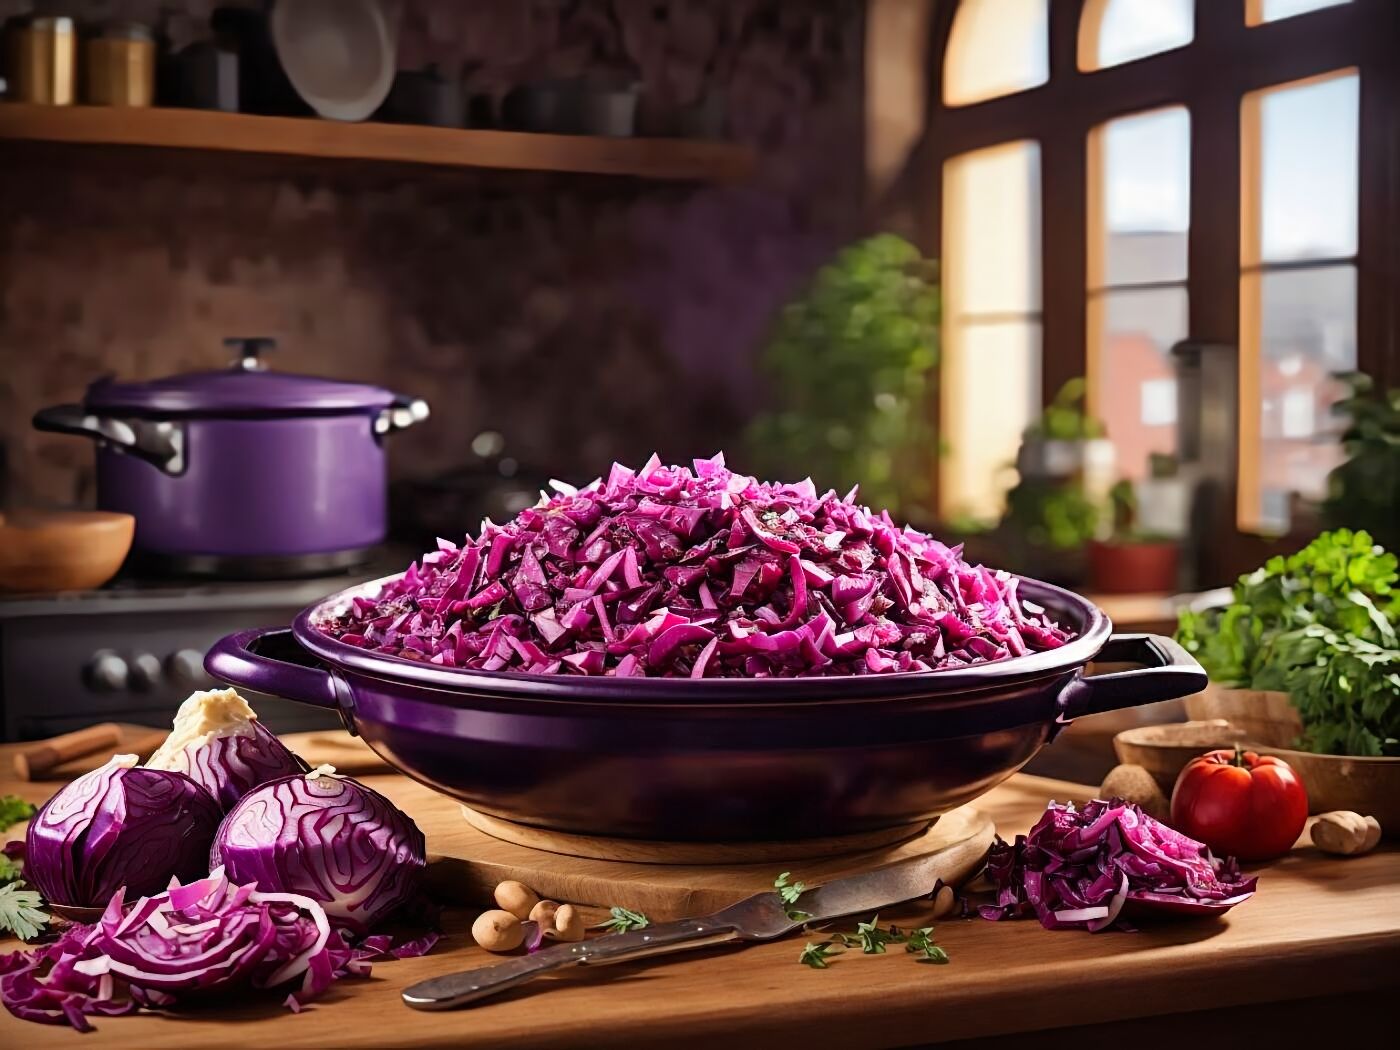 The German Red Cabbage Recipe